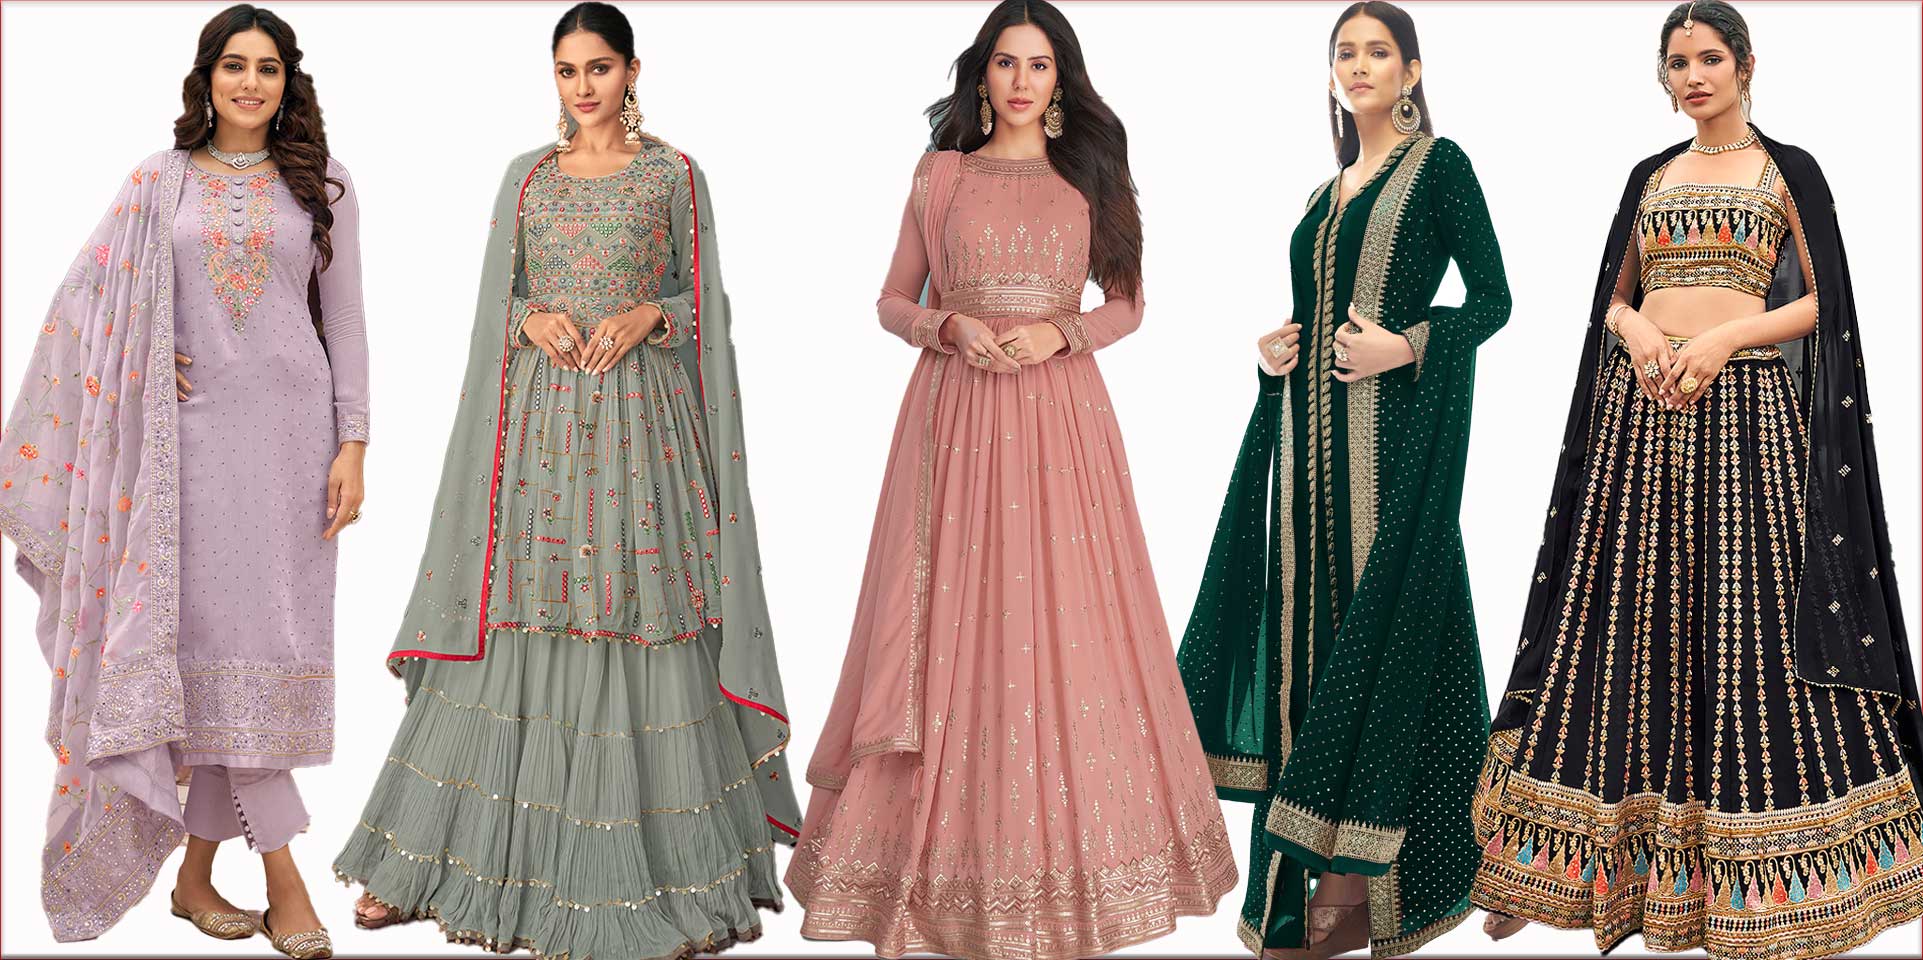 Best Ideas to Pick the Right Indian Outfits for the Upcoming Wedding Season